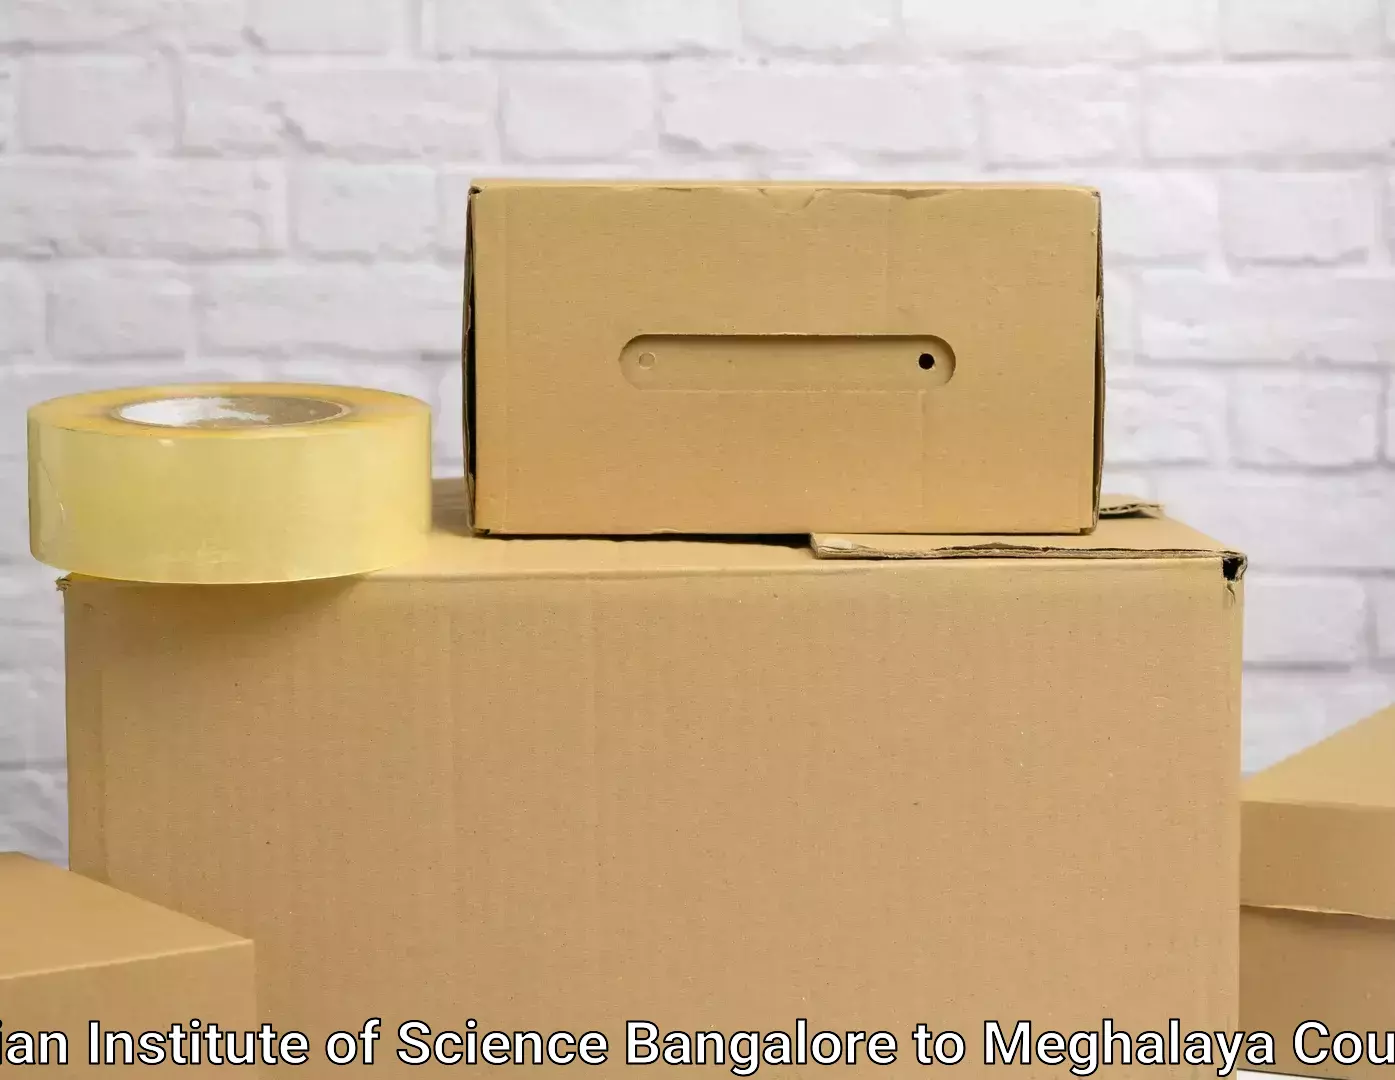 Home moving specialists Indian Institute of Science Bangalore to Meghalaya